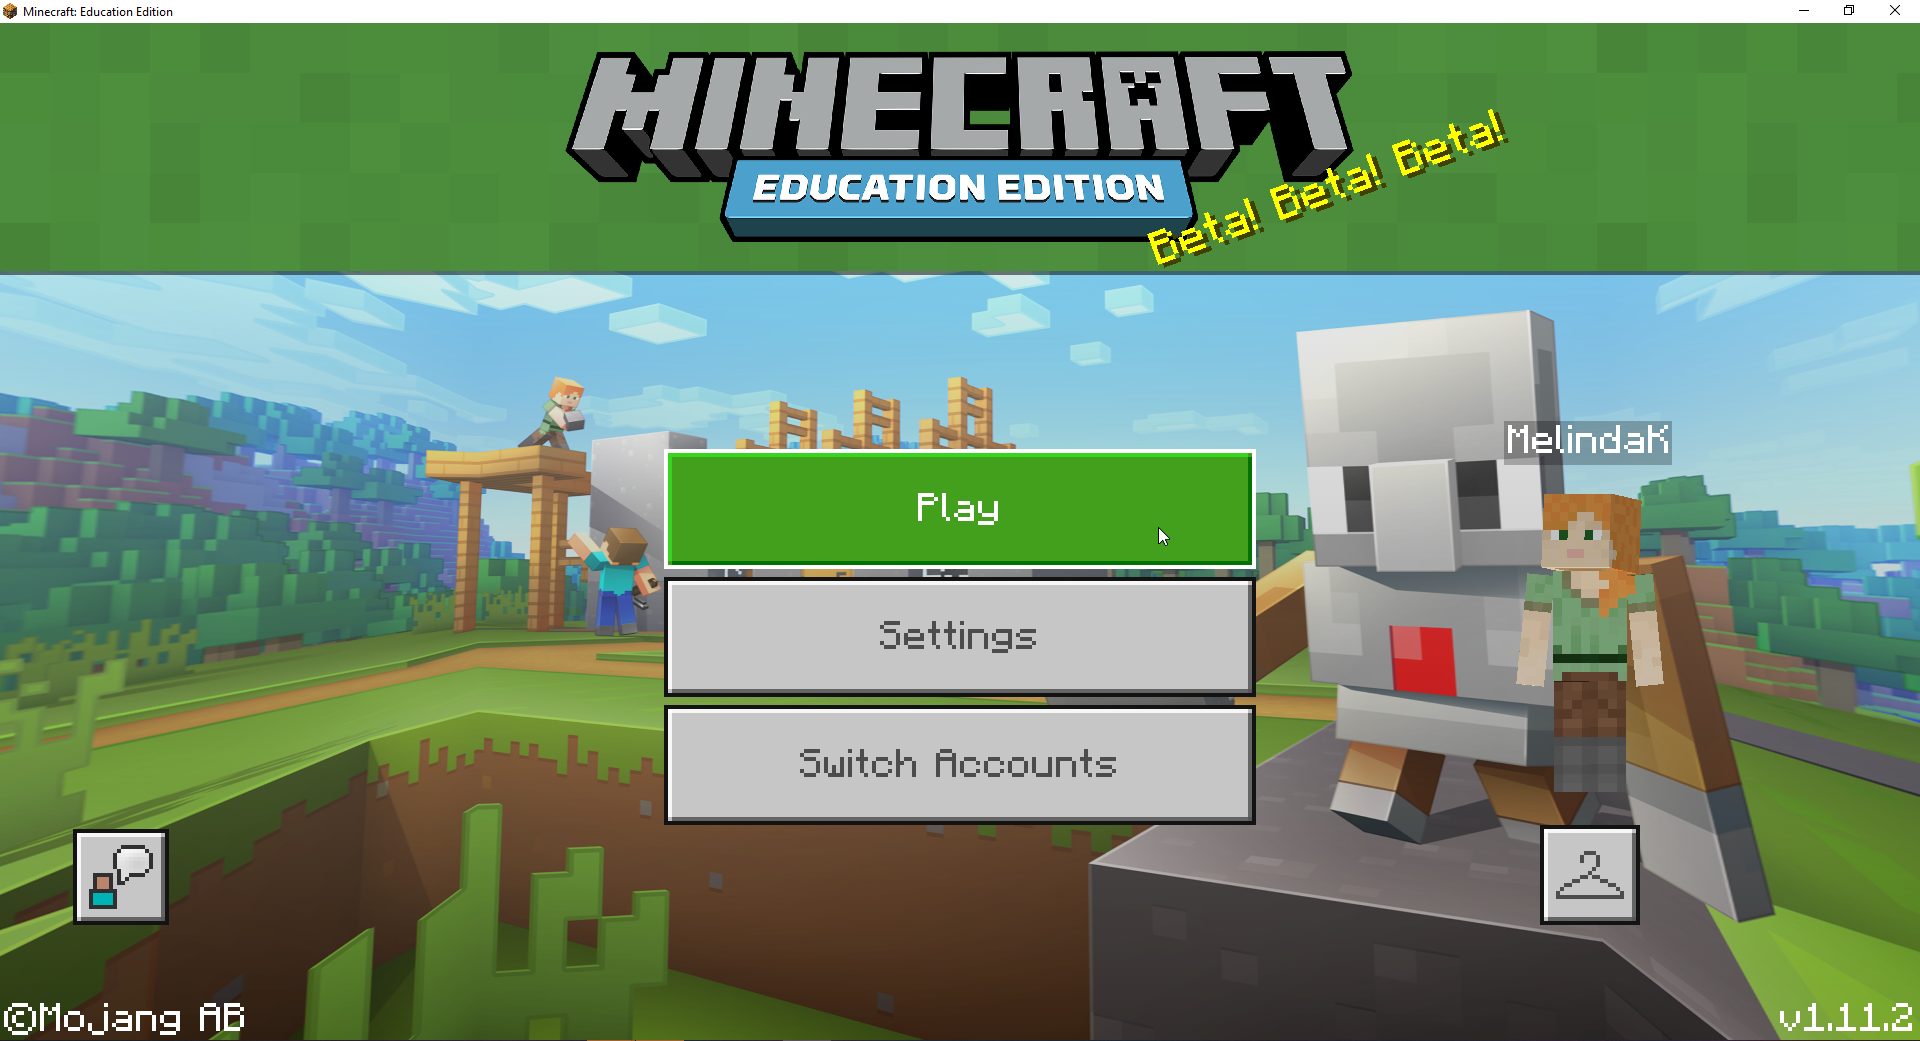 How To Set Up A Multiplayer Game, How To Make Custom Bed In Minecraft Education Edition On Ipad